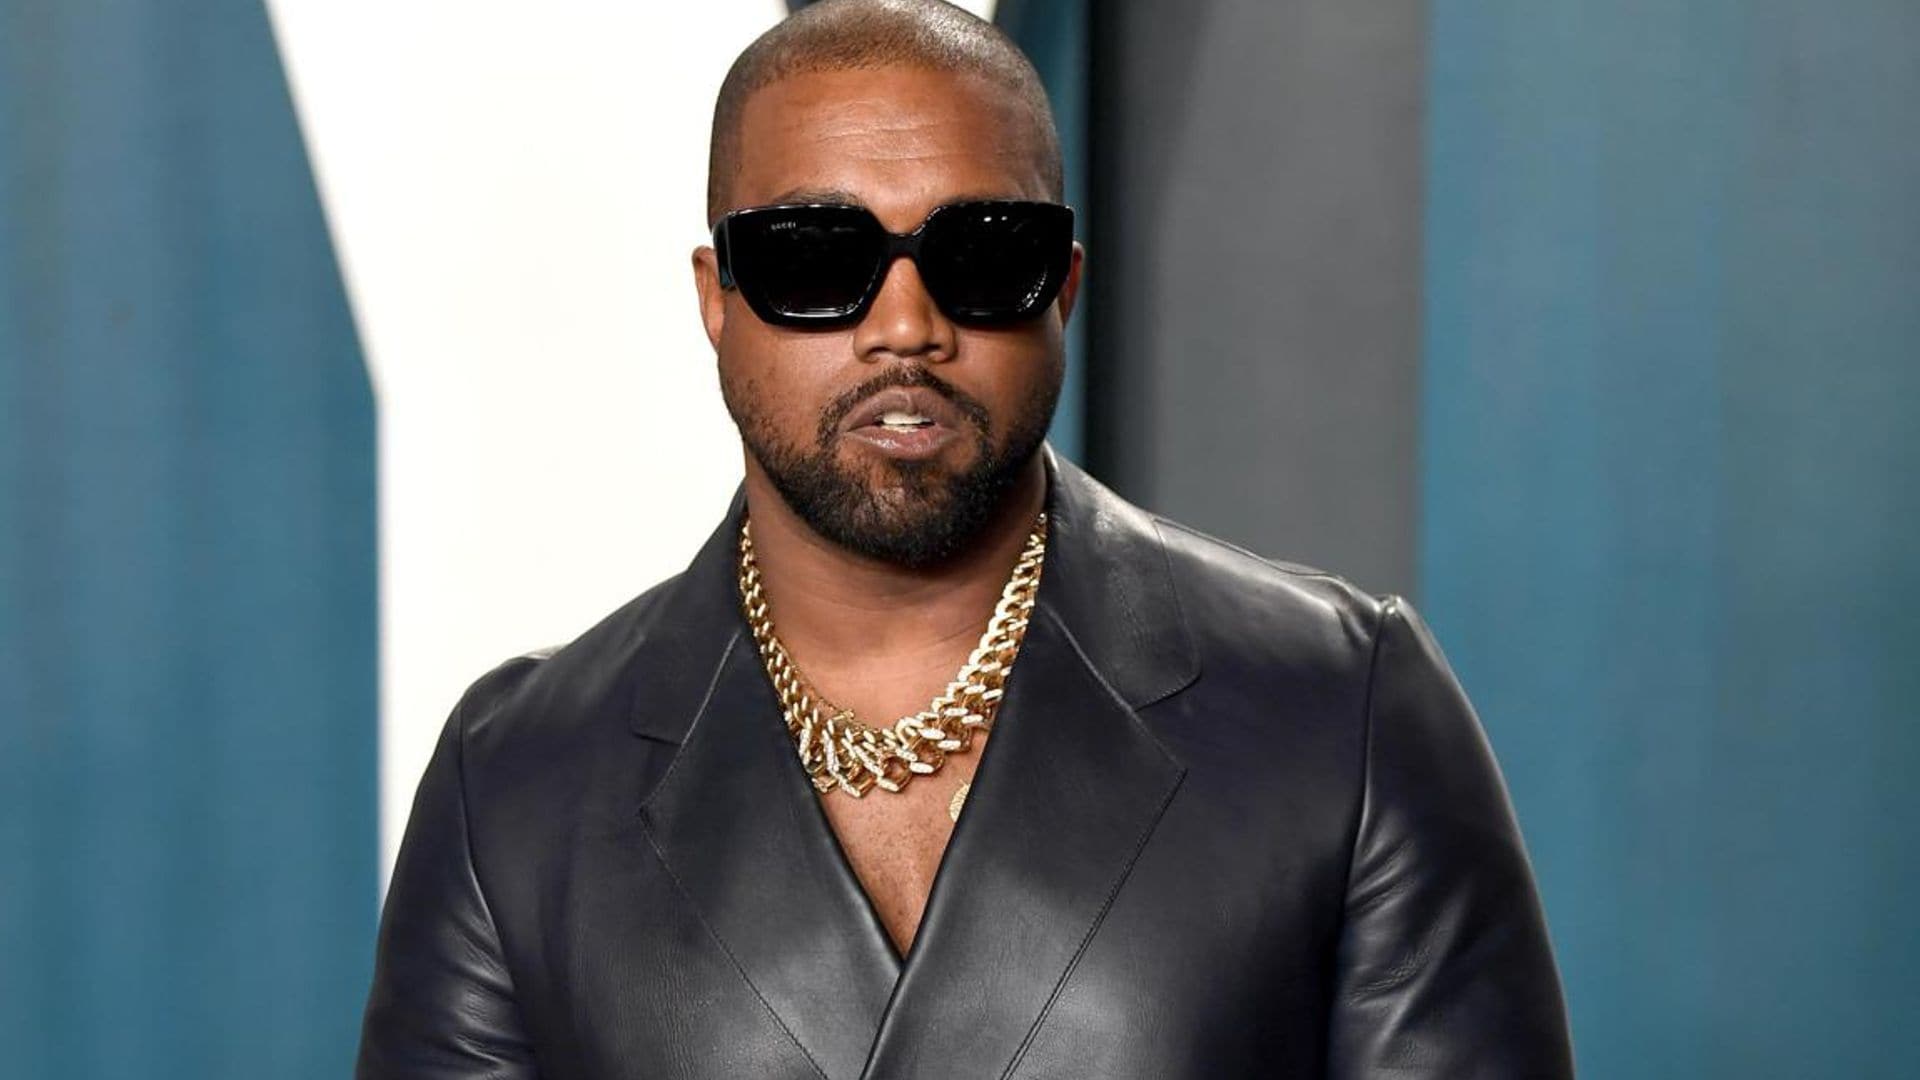 Kanye West’s Latest Twitter Rant Takes Aim At Record Labels, Drake, And J. Cole